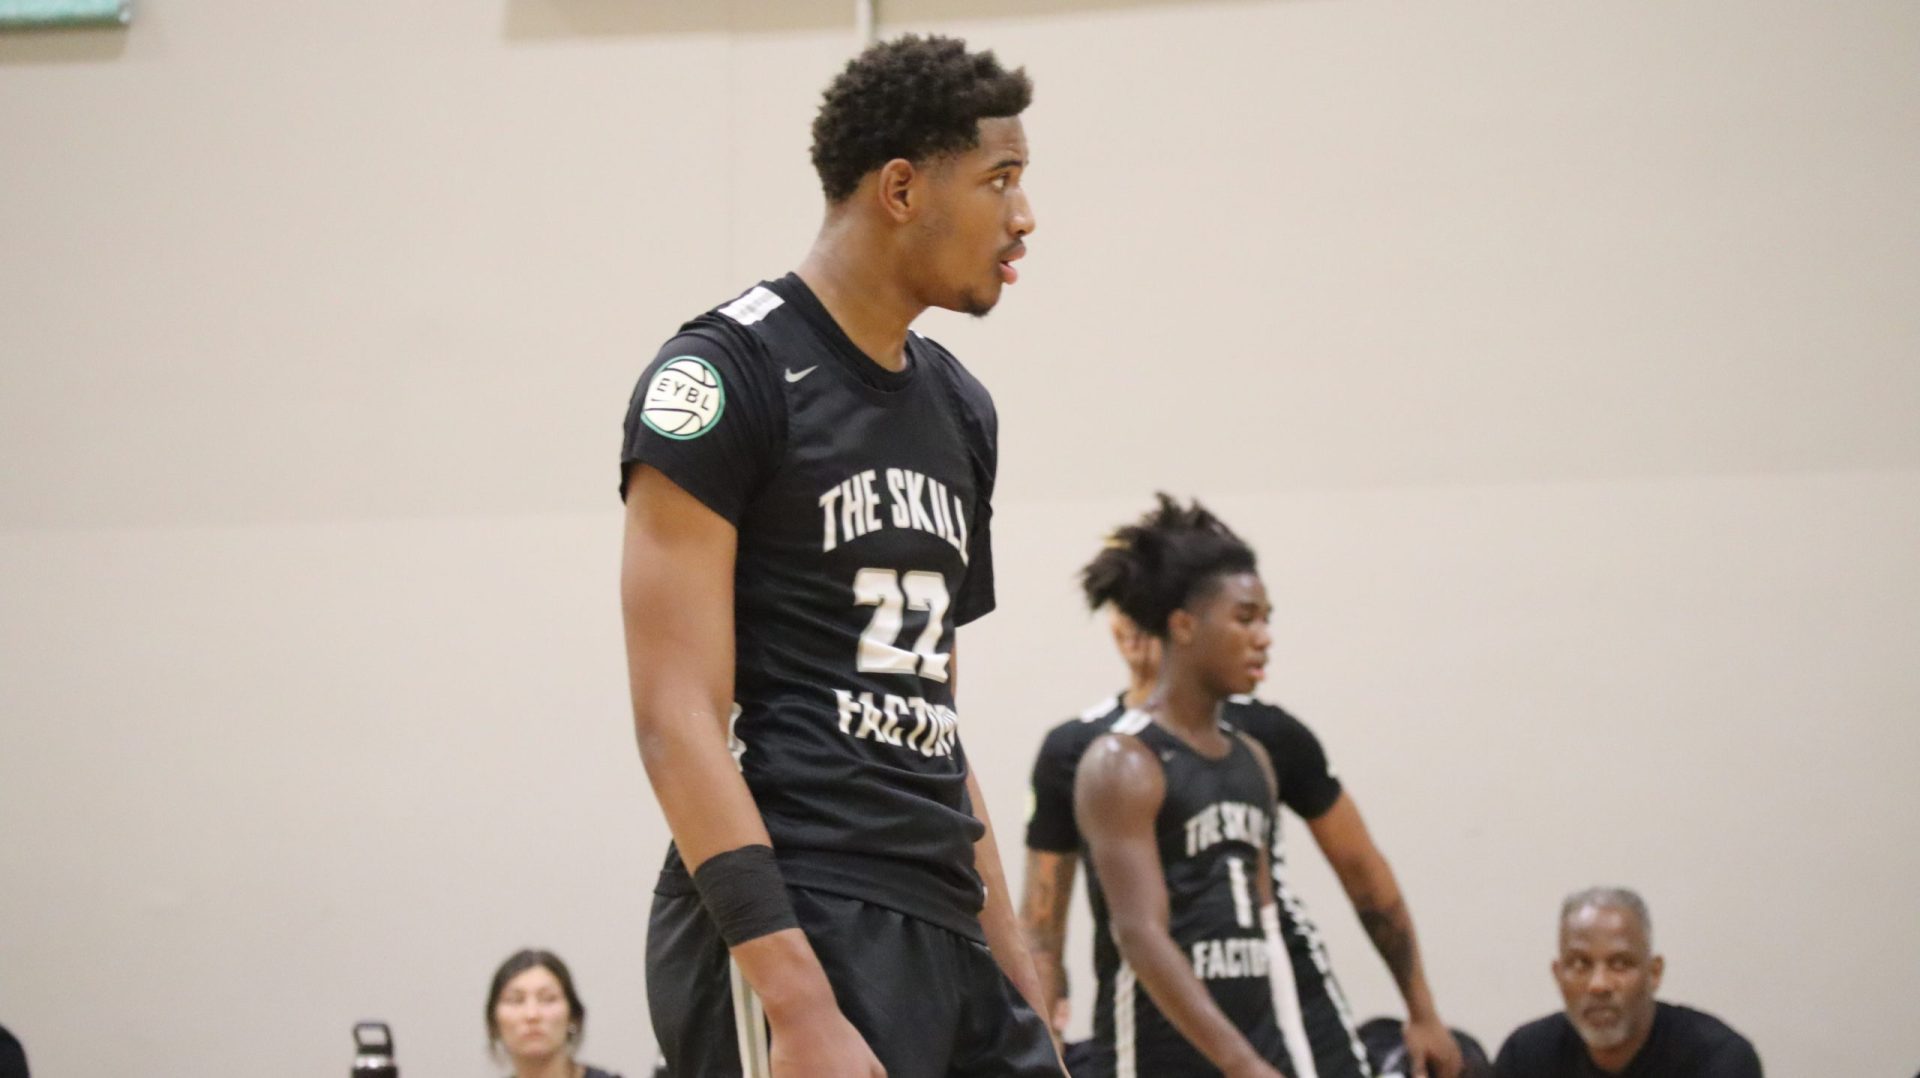 Player notes on 2023 IU targets at the Nike EYBL second live period event in Indiana